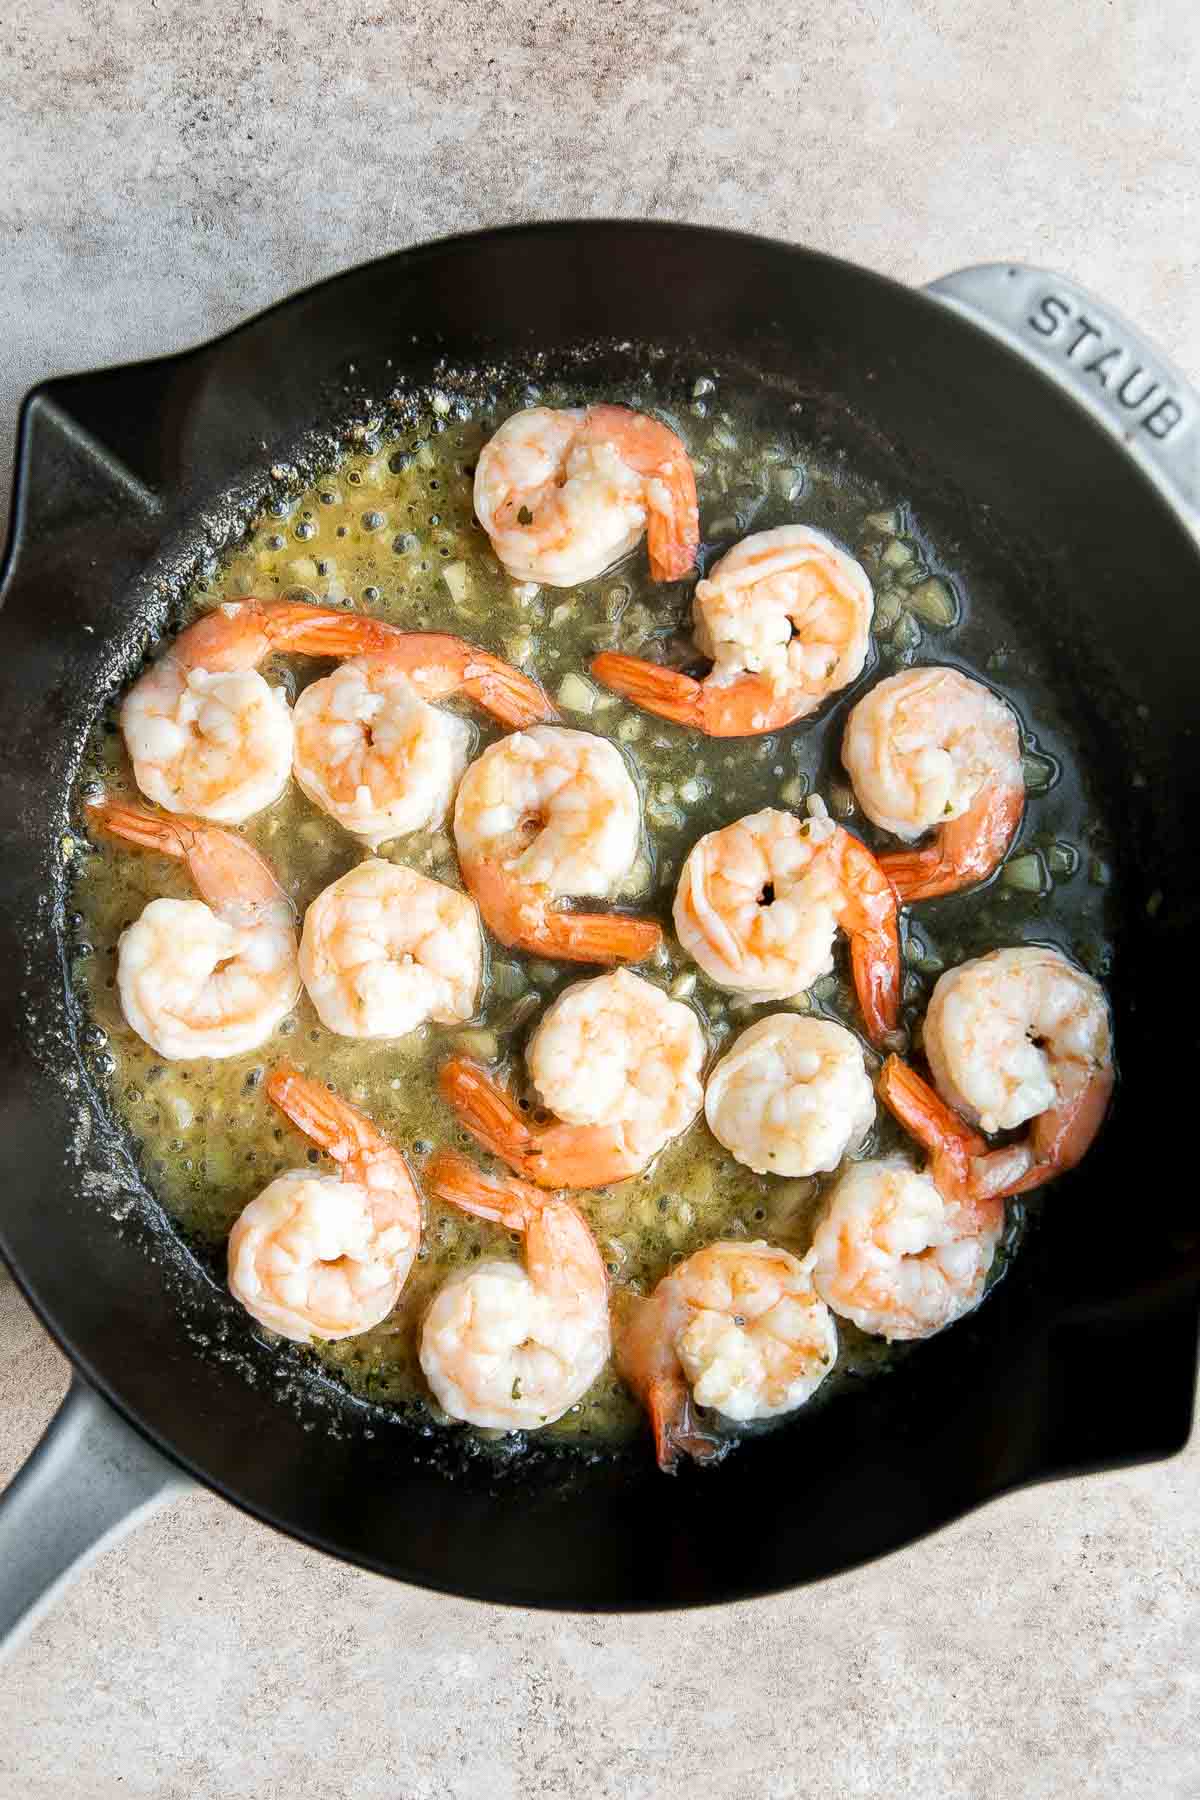 Shrimp scampi is a delicious American-Italian dish made with tender shrimp and a flavorful buttery sauce that is quick and easy to make in 15 minutes. | aheadofthyme.com